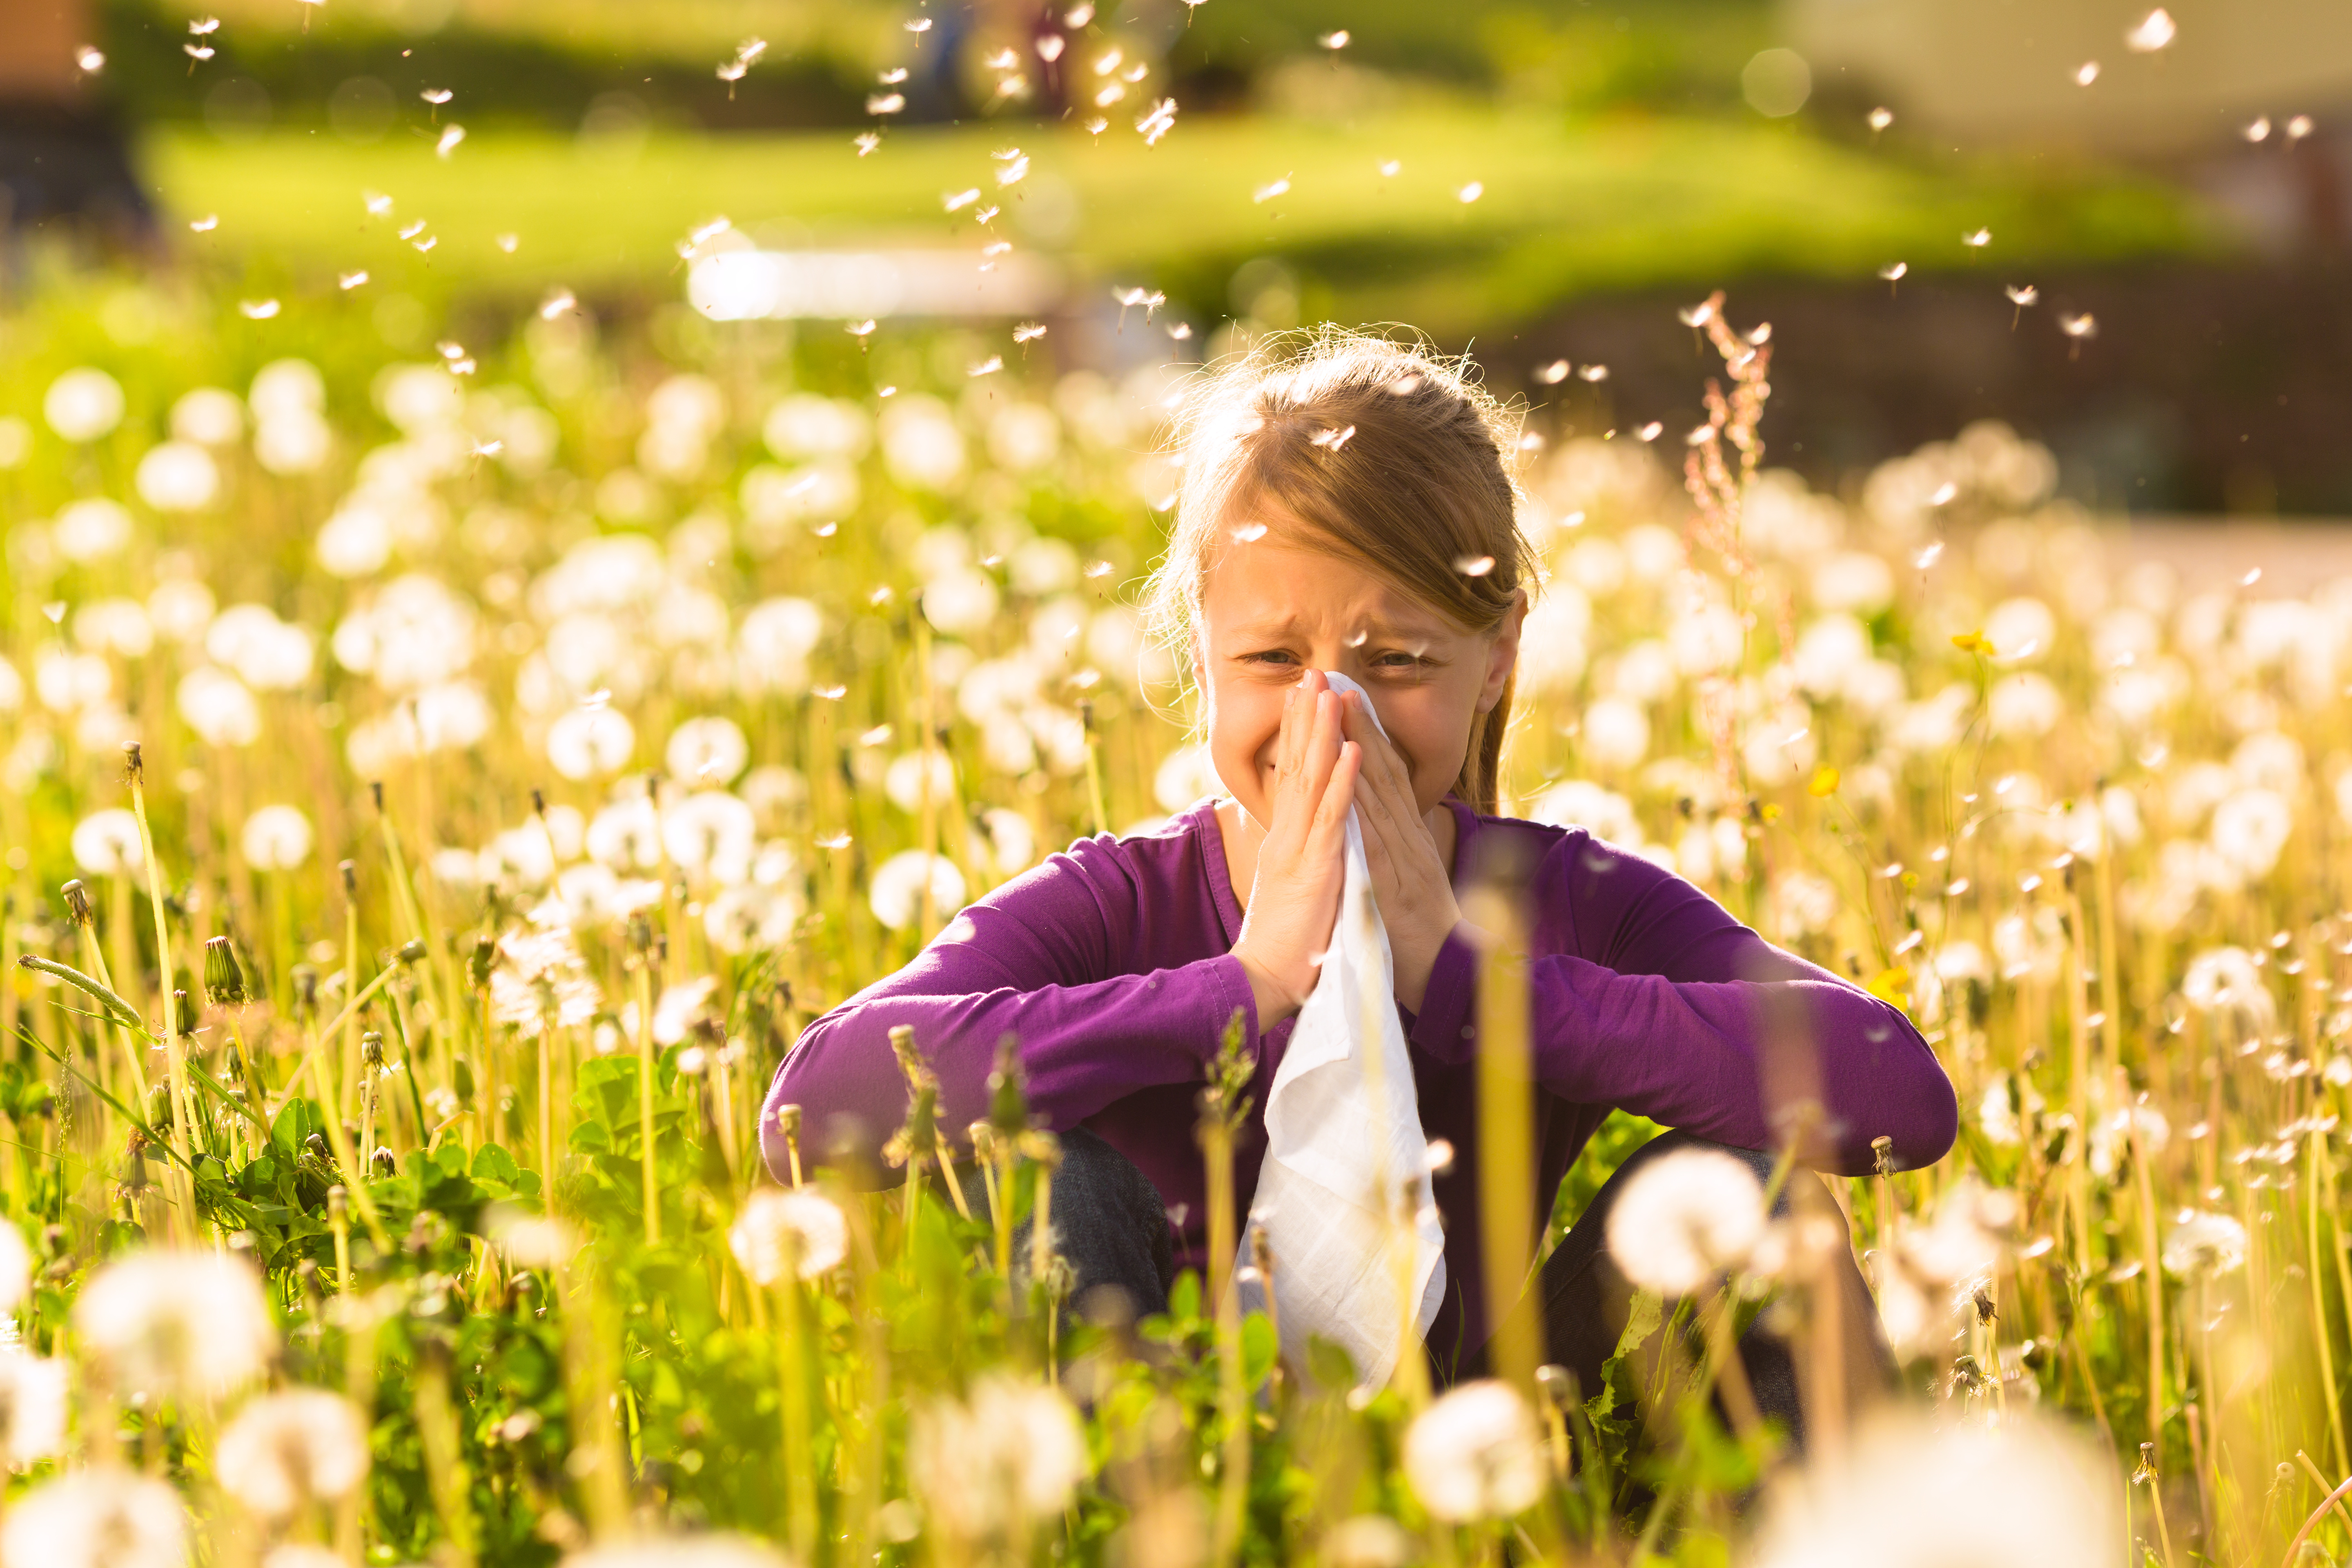 HOW TO PREVENT OR CLEAR ALLERGIES?